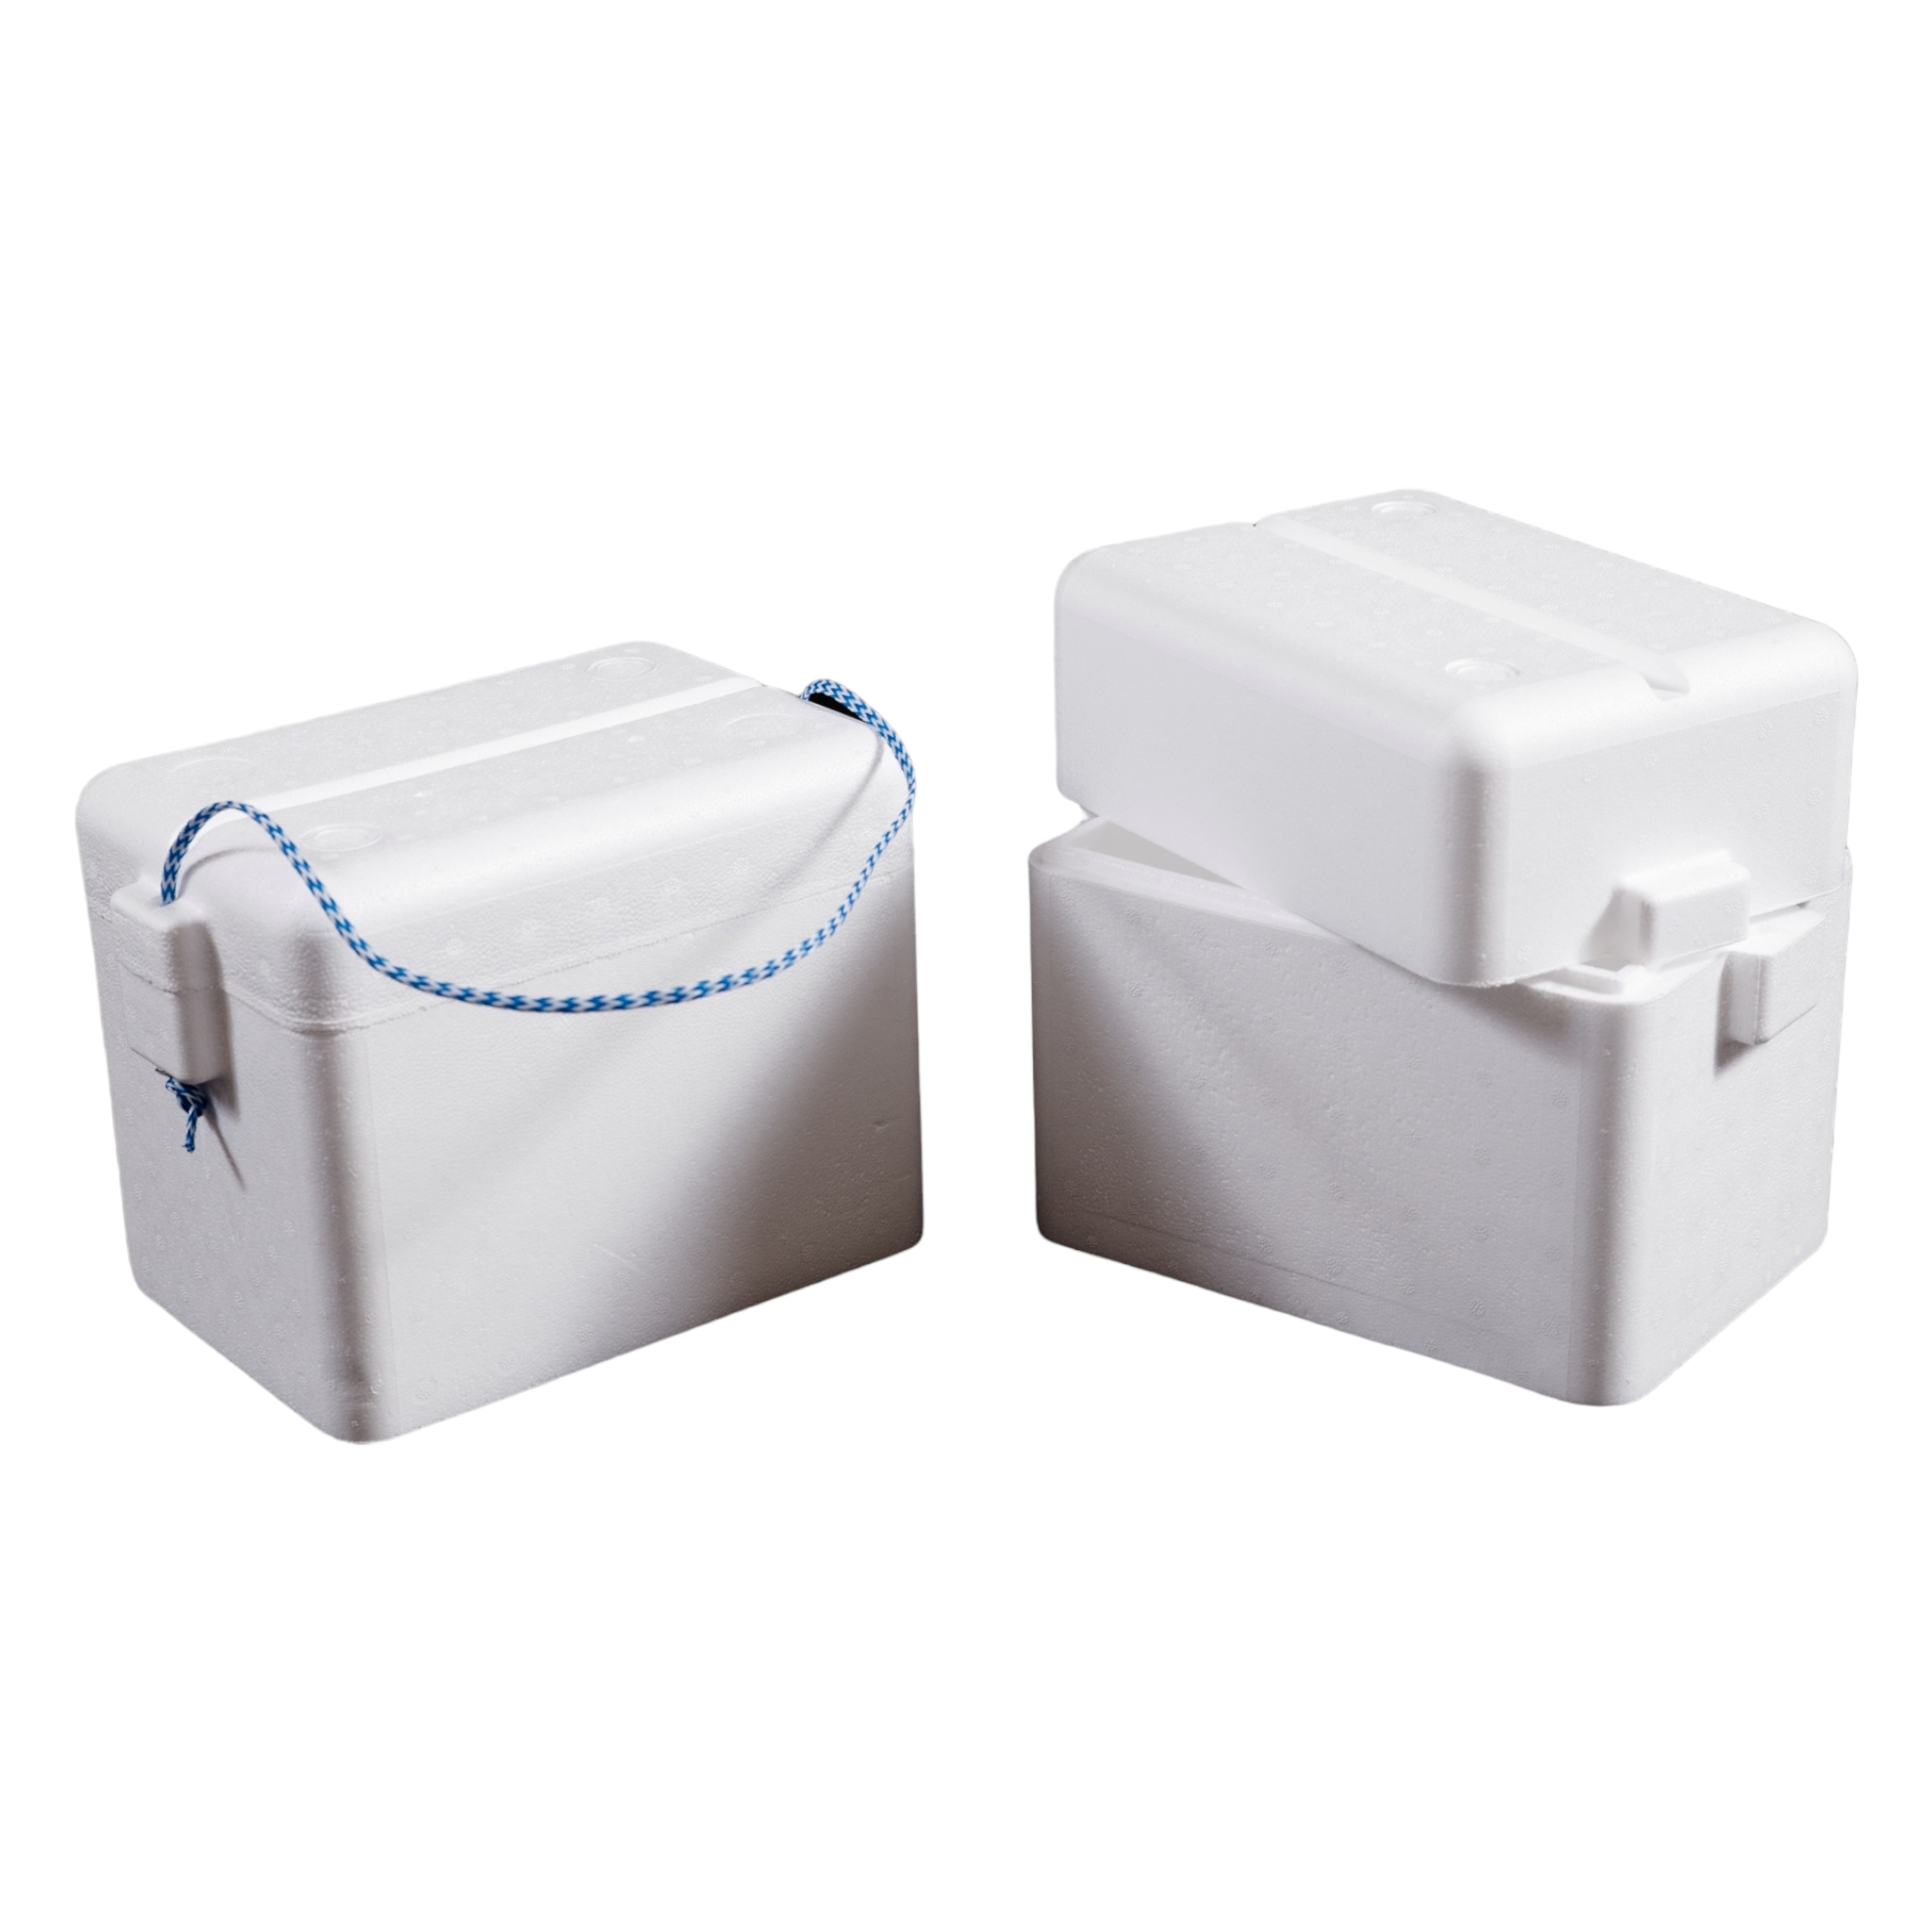 Polystyrene 6L Cooler Box Deep with Rope Thermal Storage Box - Fits 6-Pack